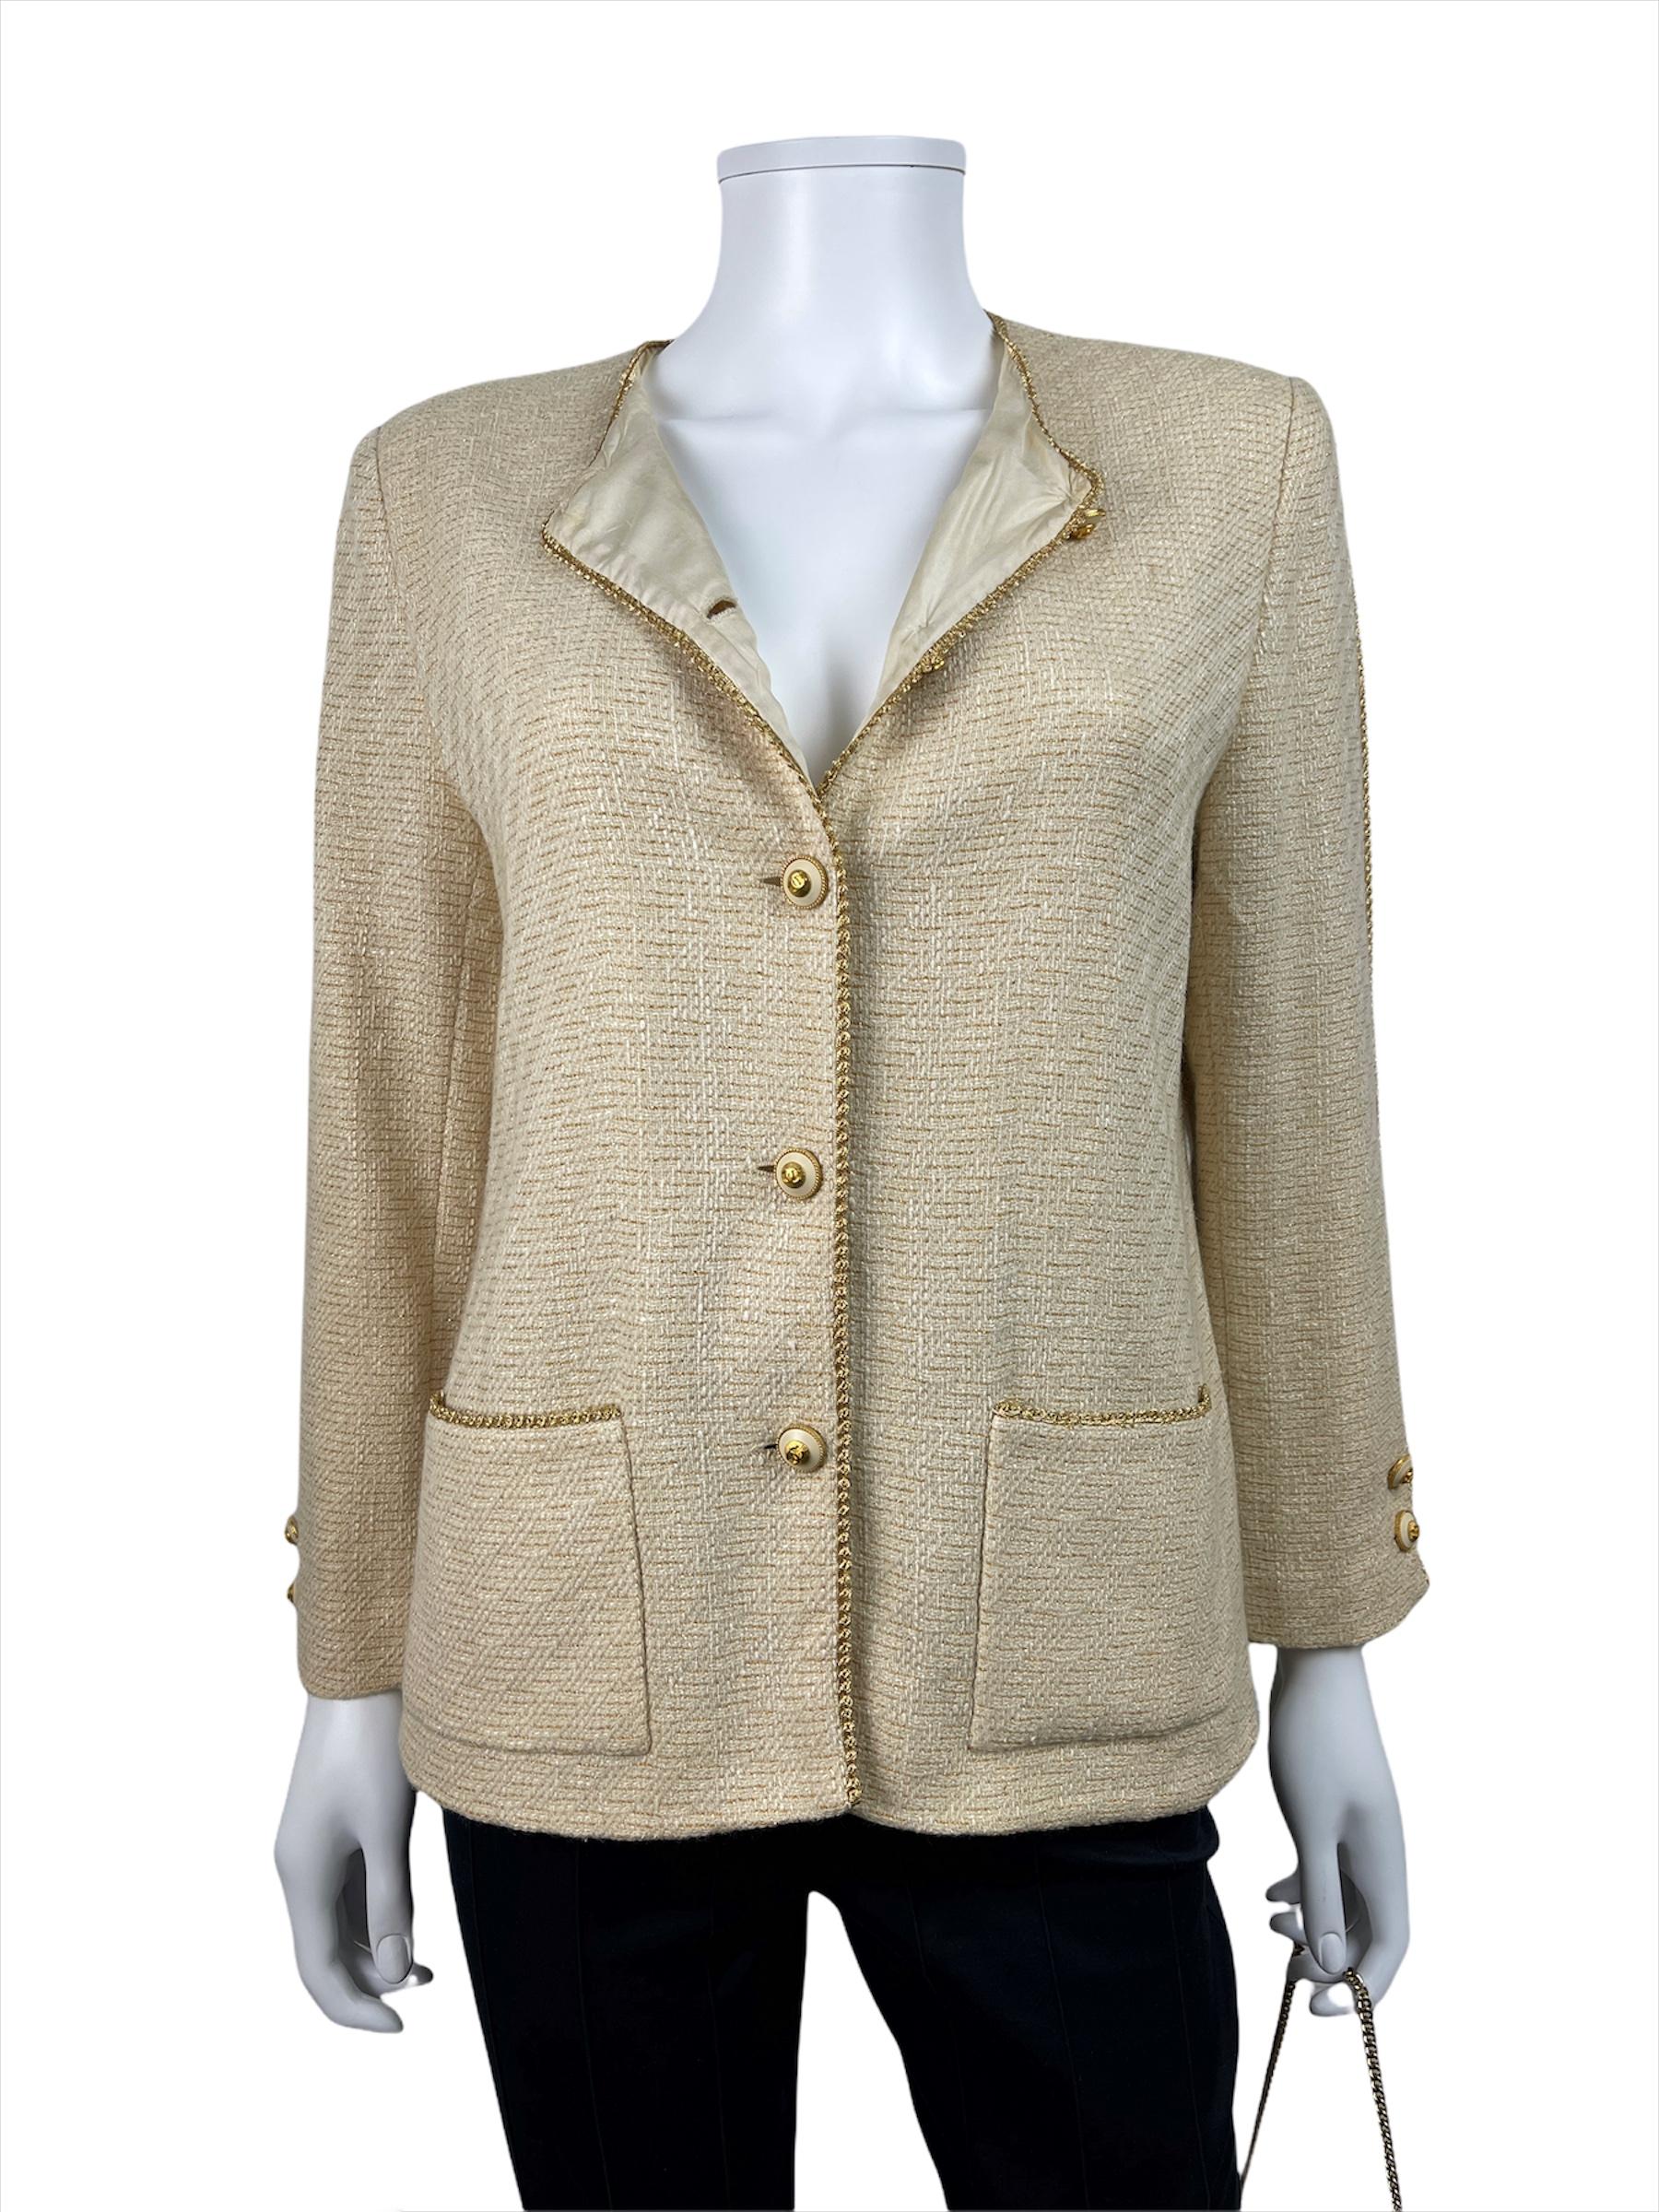 Vintage Chanel Tweed Skirt Suit 2pieces Set Ivory and Gold 